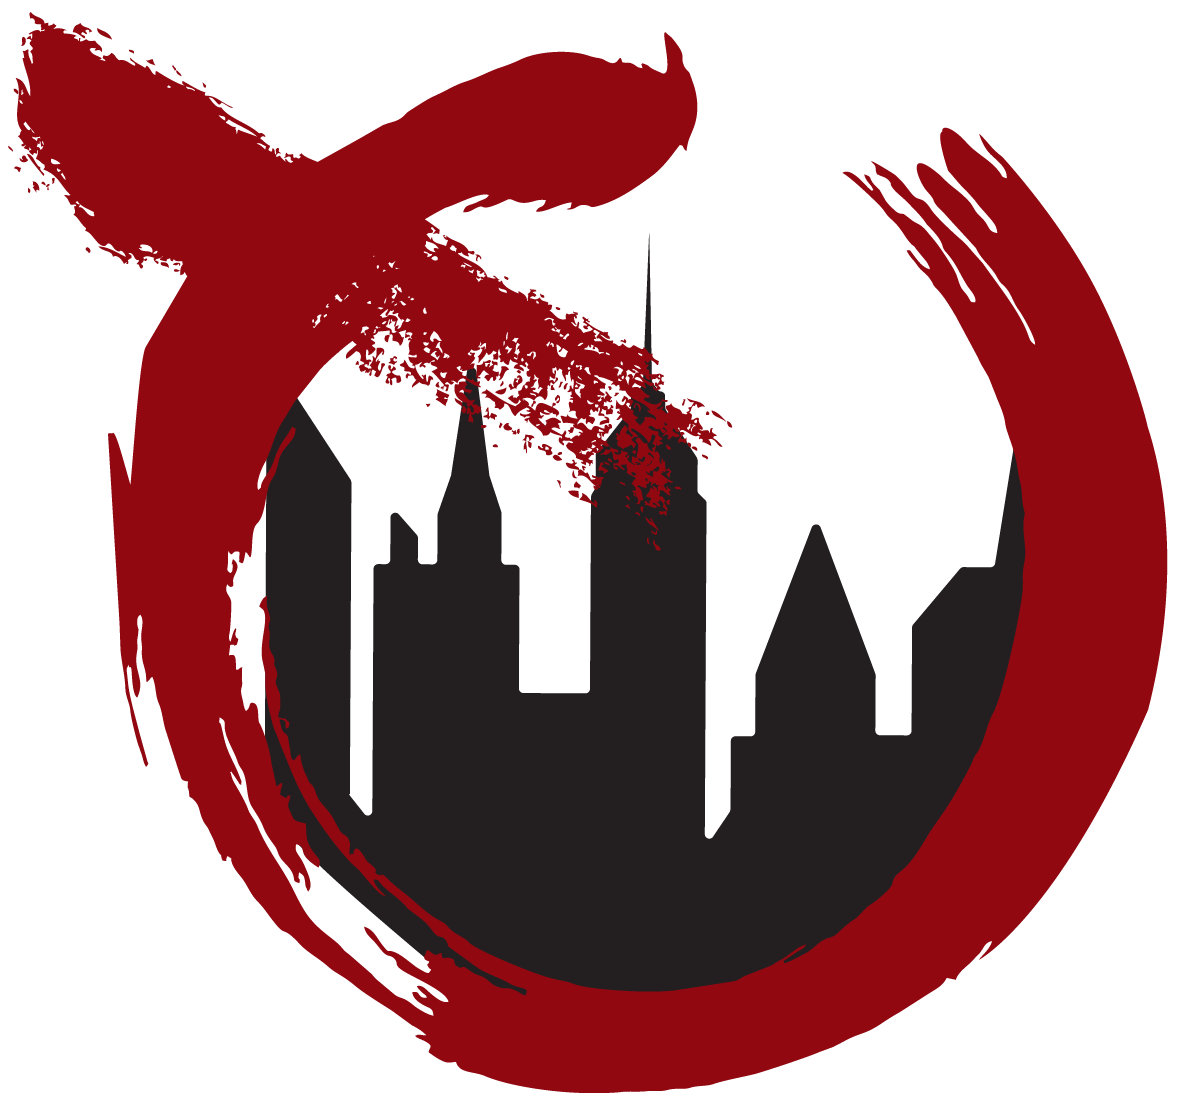 The Restoration Place logo: a red circle with a silhouette of a city in it